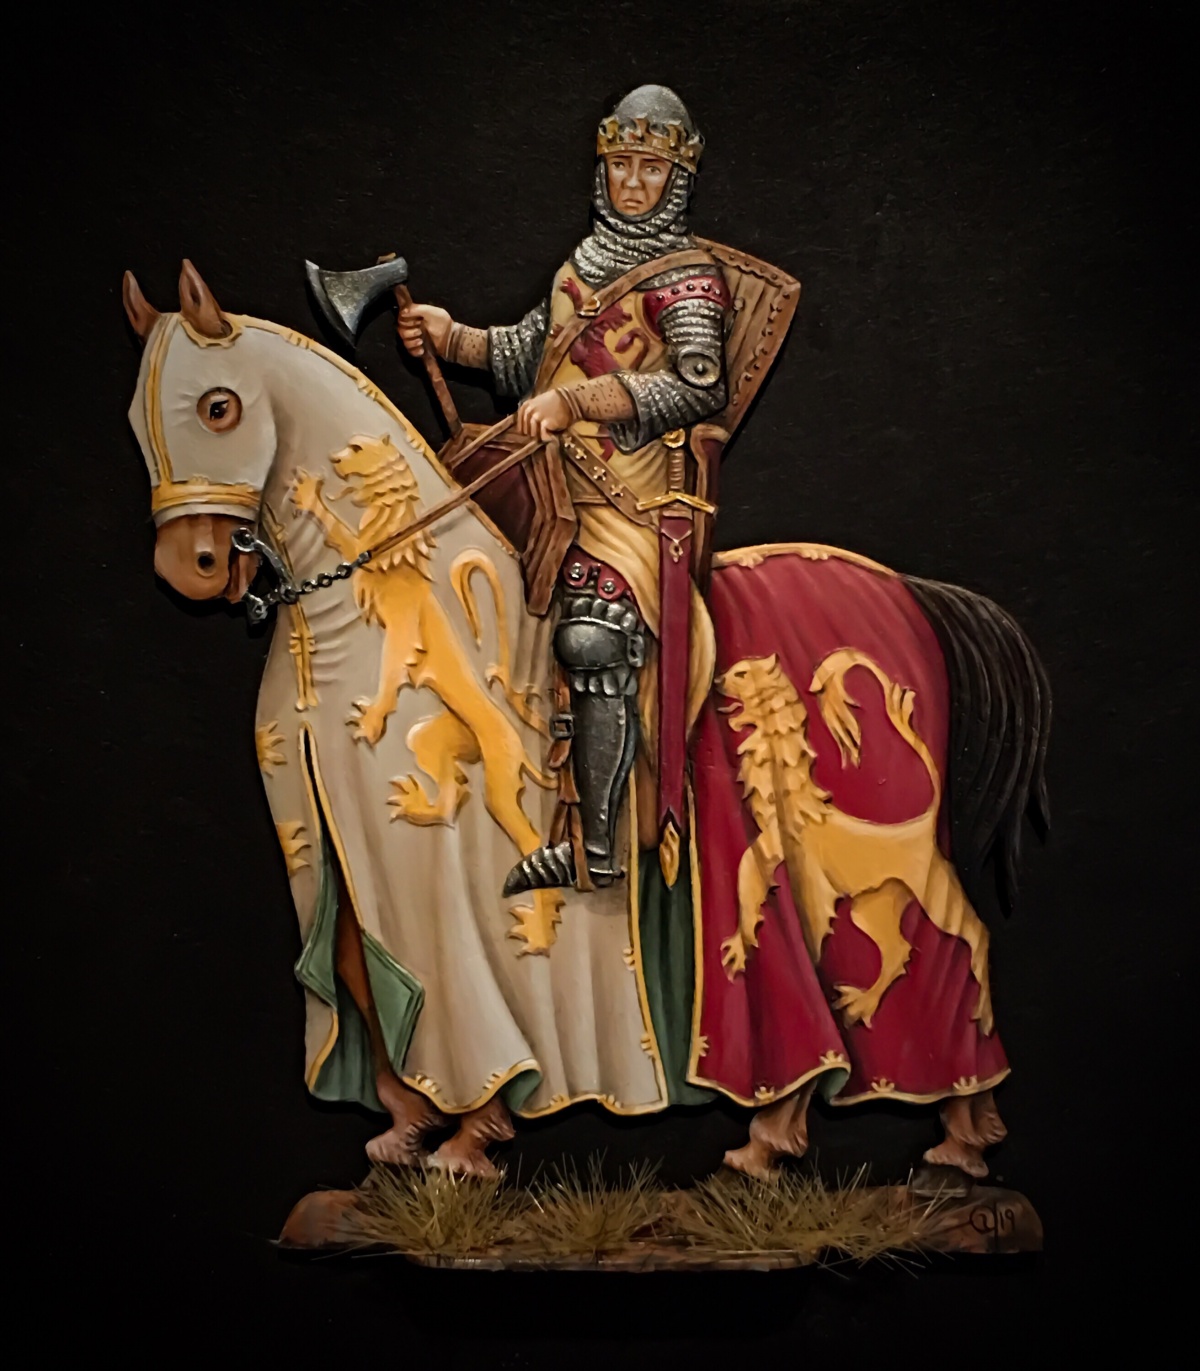 Robert the Bruce, King of Scotland by Enrique Vilchis · Putty&Paint